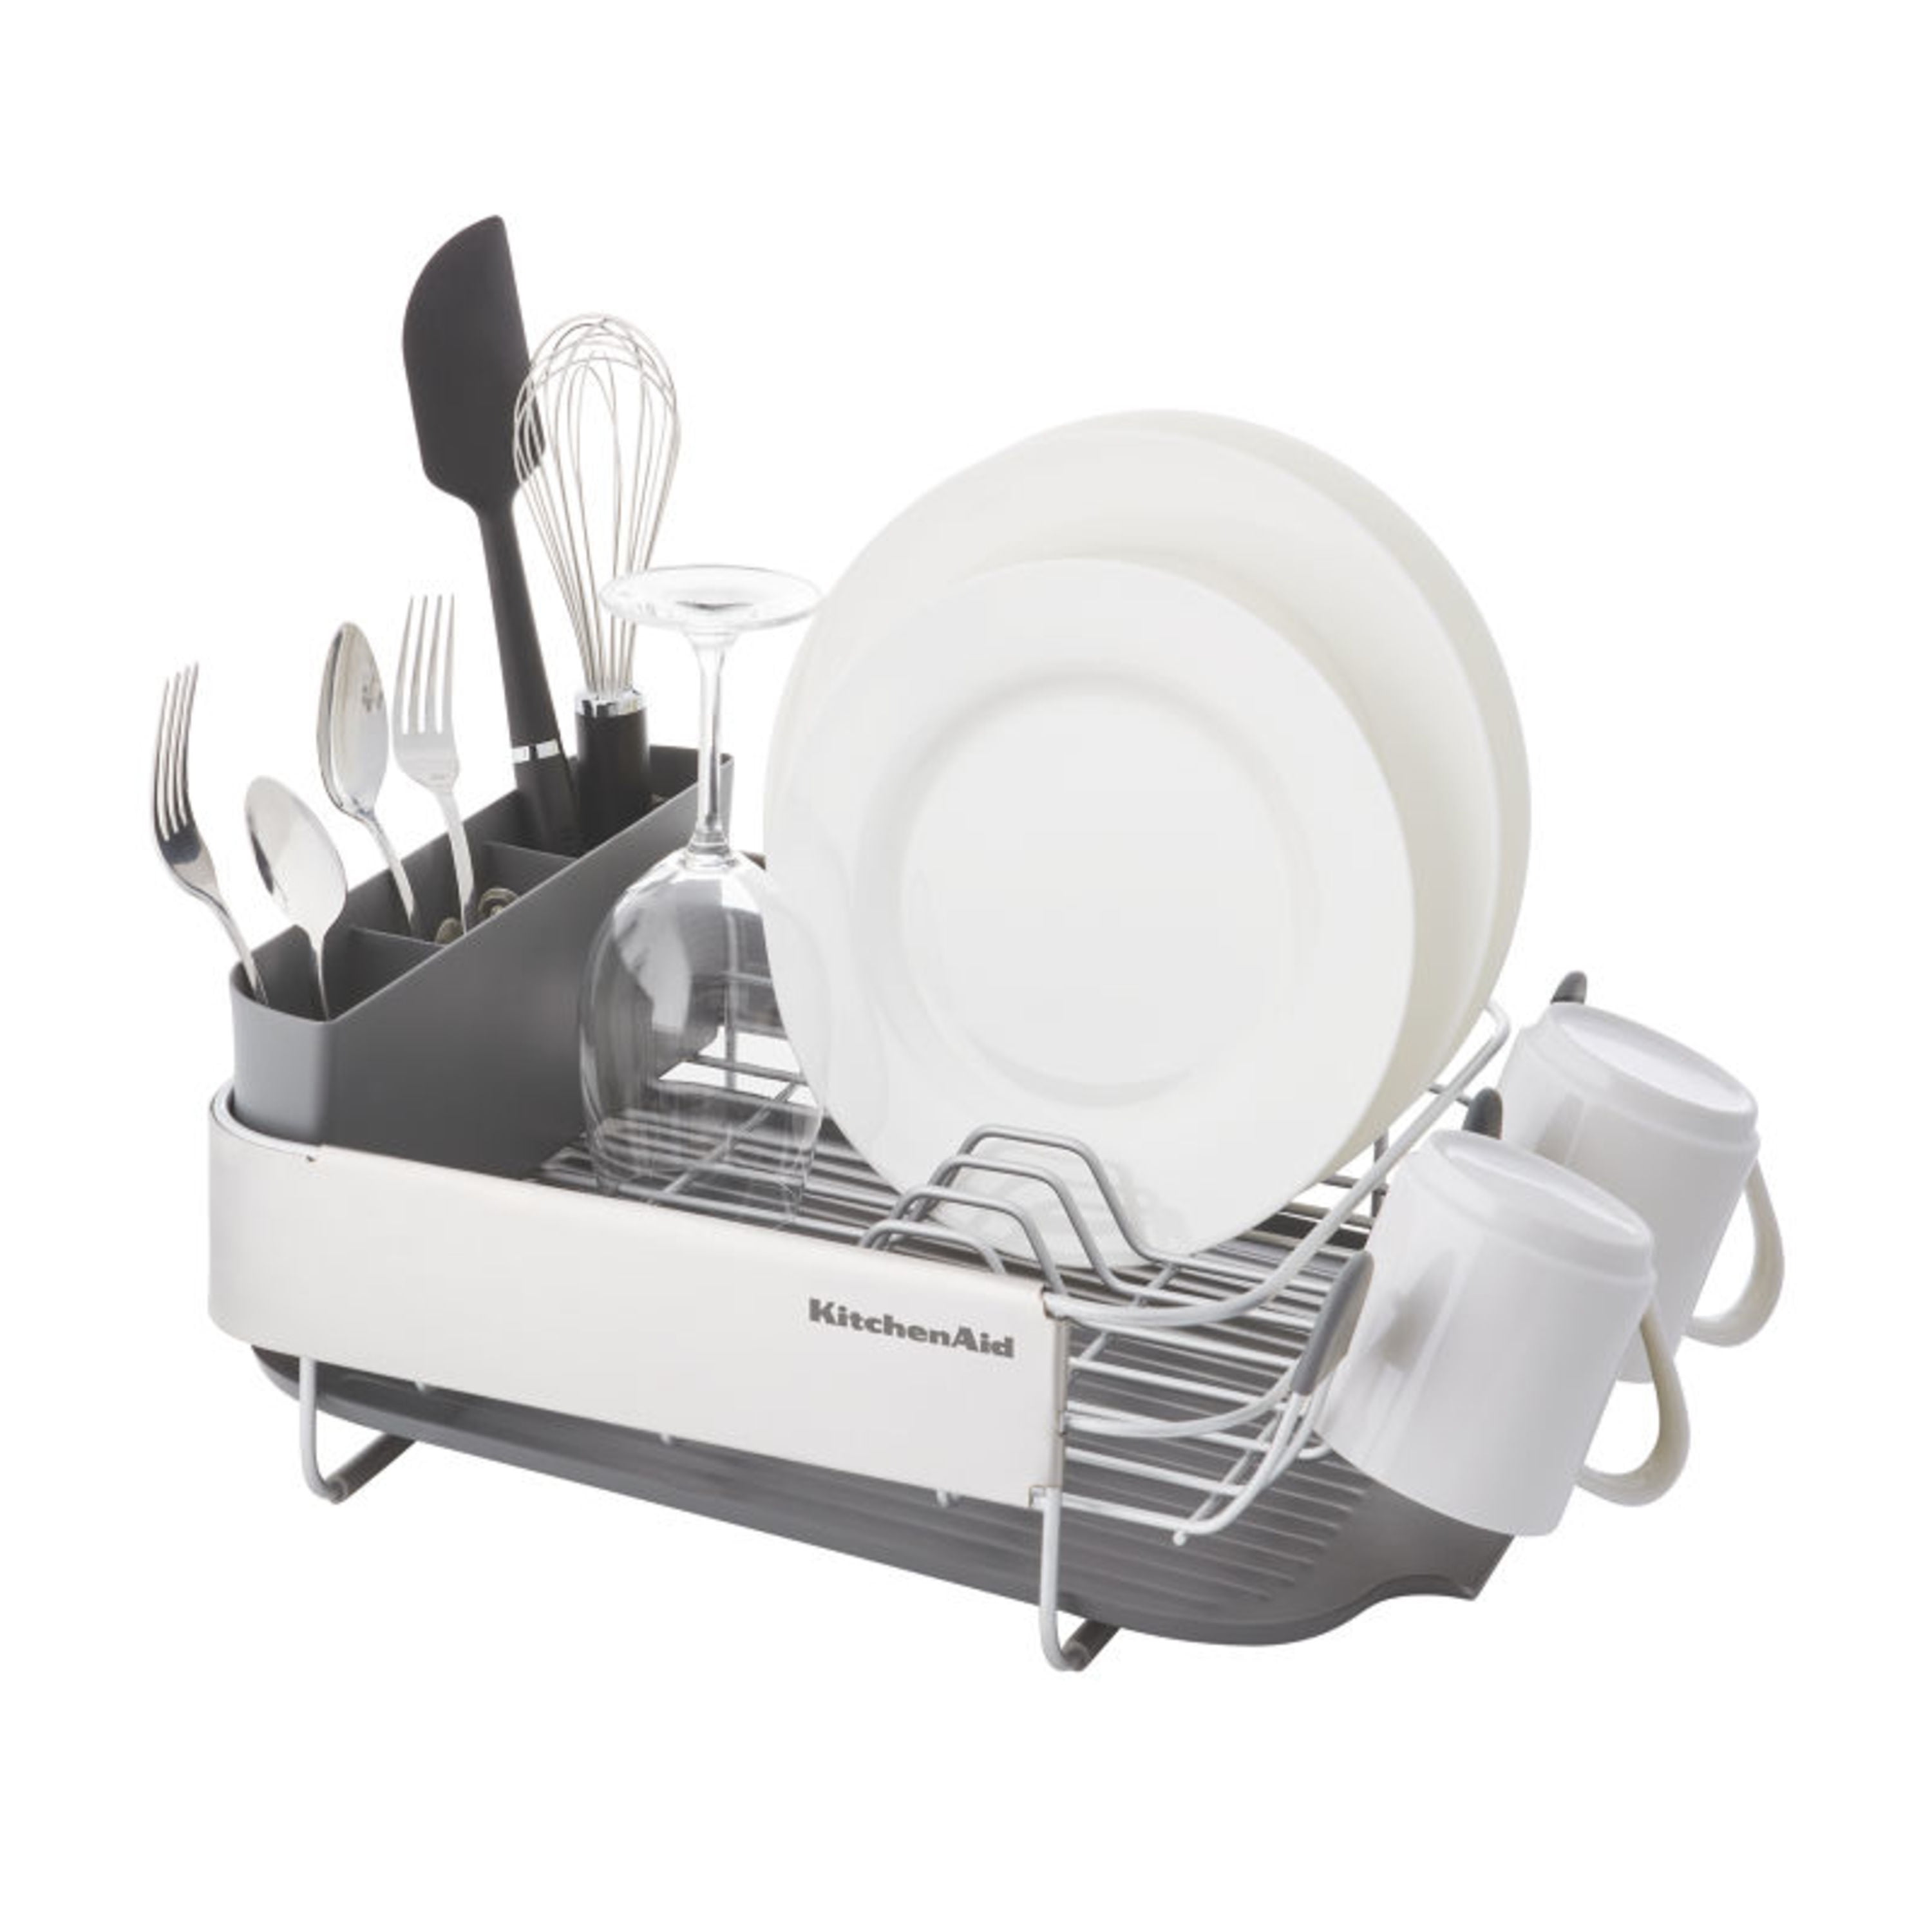 KitchenAid compact dish drying rack. 4f - Lil Dusty Online Auctions - All  Estate Services, LLC